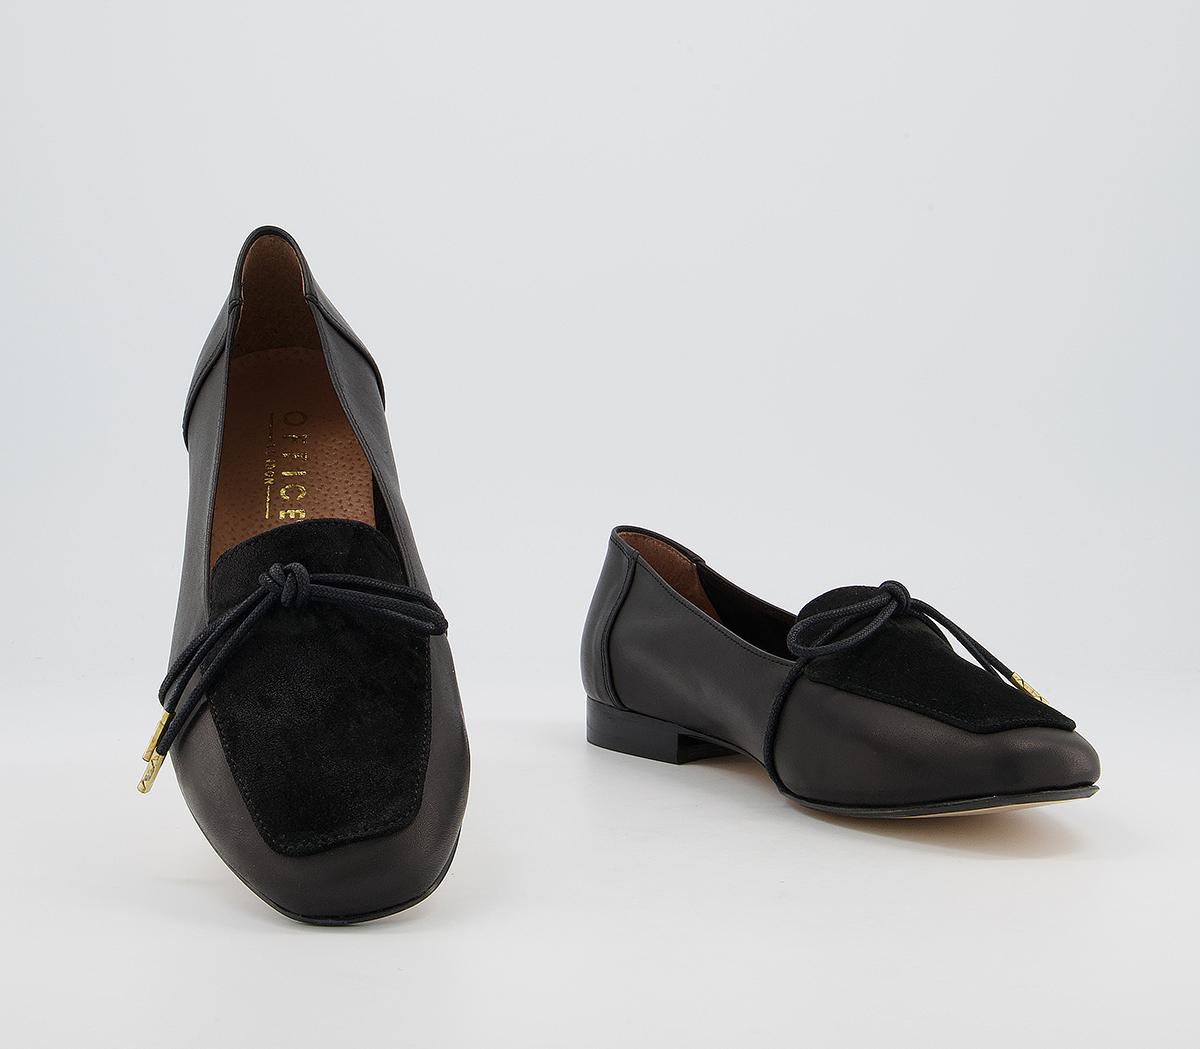 OFFICE Flashlight Slim Bow Loafers Black Leather Suede Mix - Flat Shoes ...